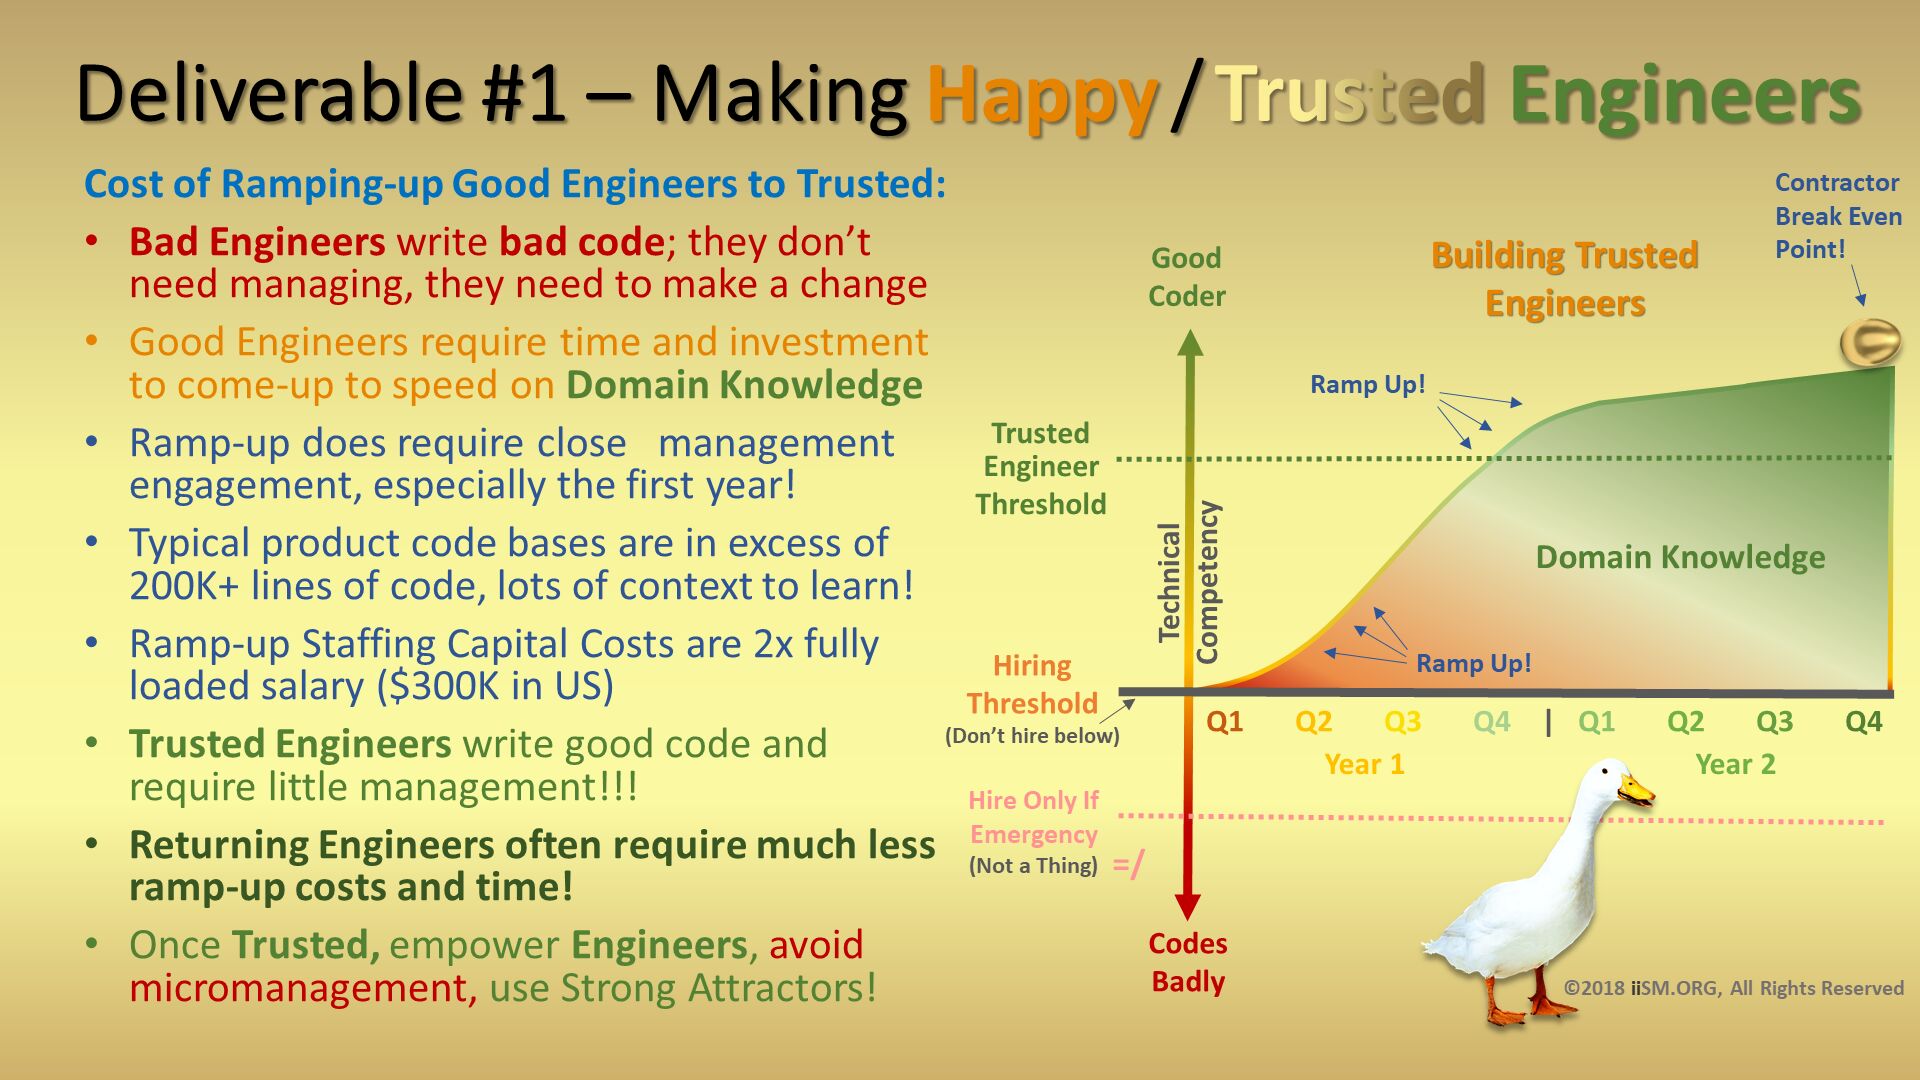 Deliverable #1 – Making Happy / Trusted Engineers. Cost of Ramping-up Good Engineers to Trusted:
Bad Engineers write bad code; they don’t need managing, they need to make a change
Good Engineers require time and investment to come-up to speed on Domain Knowledge
Ramp-up does require close   management engagement, especially the first year!
Typical product code bases are in excess of 200K+ lines of code, lots of context to learn!
Ramp-up Staffing Capital Costs are 2x fully loaded salary ($300K in US)
Trusted Engineers write good code and require little management!!!
Returning Engineers often require much less ramp-up costs and time!
Once Trusted, empower Engineers, avoid micromanagement, use Strong Attractors!
. ©2018 iiSM.ORG, All Rights Reserved.  =/. 